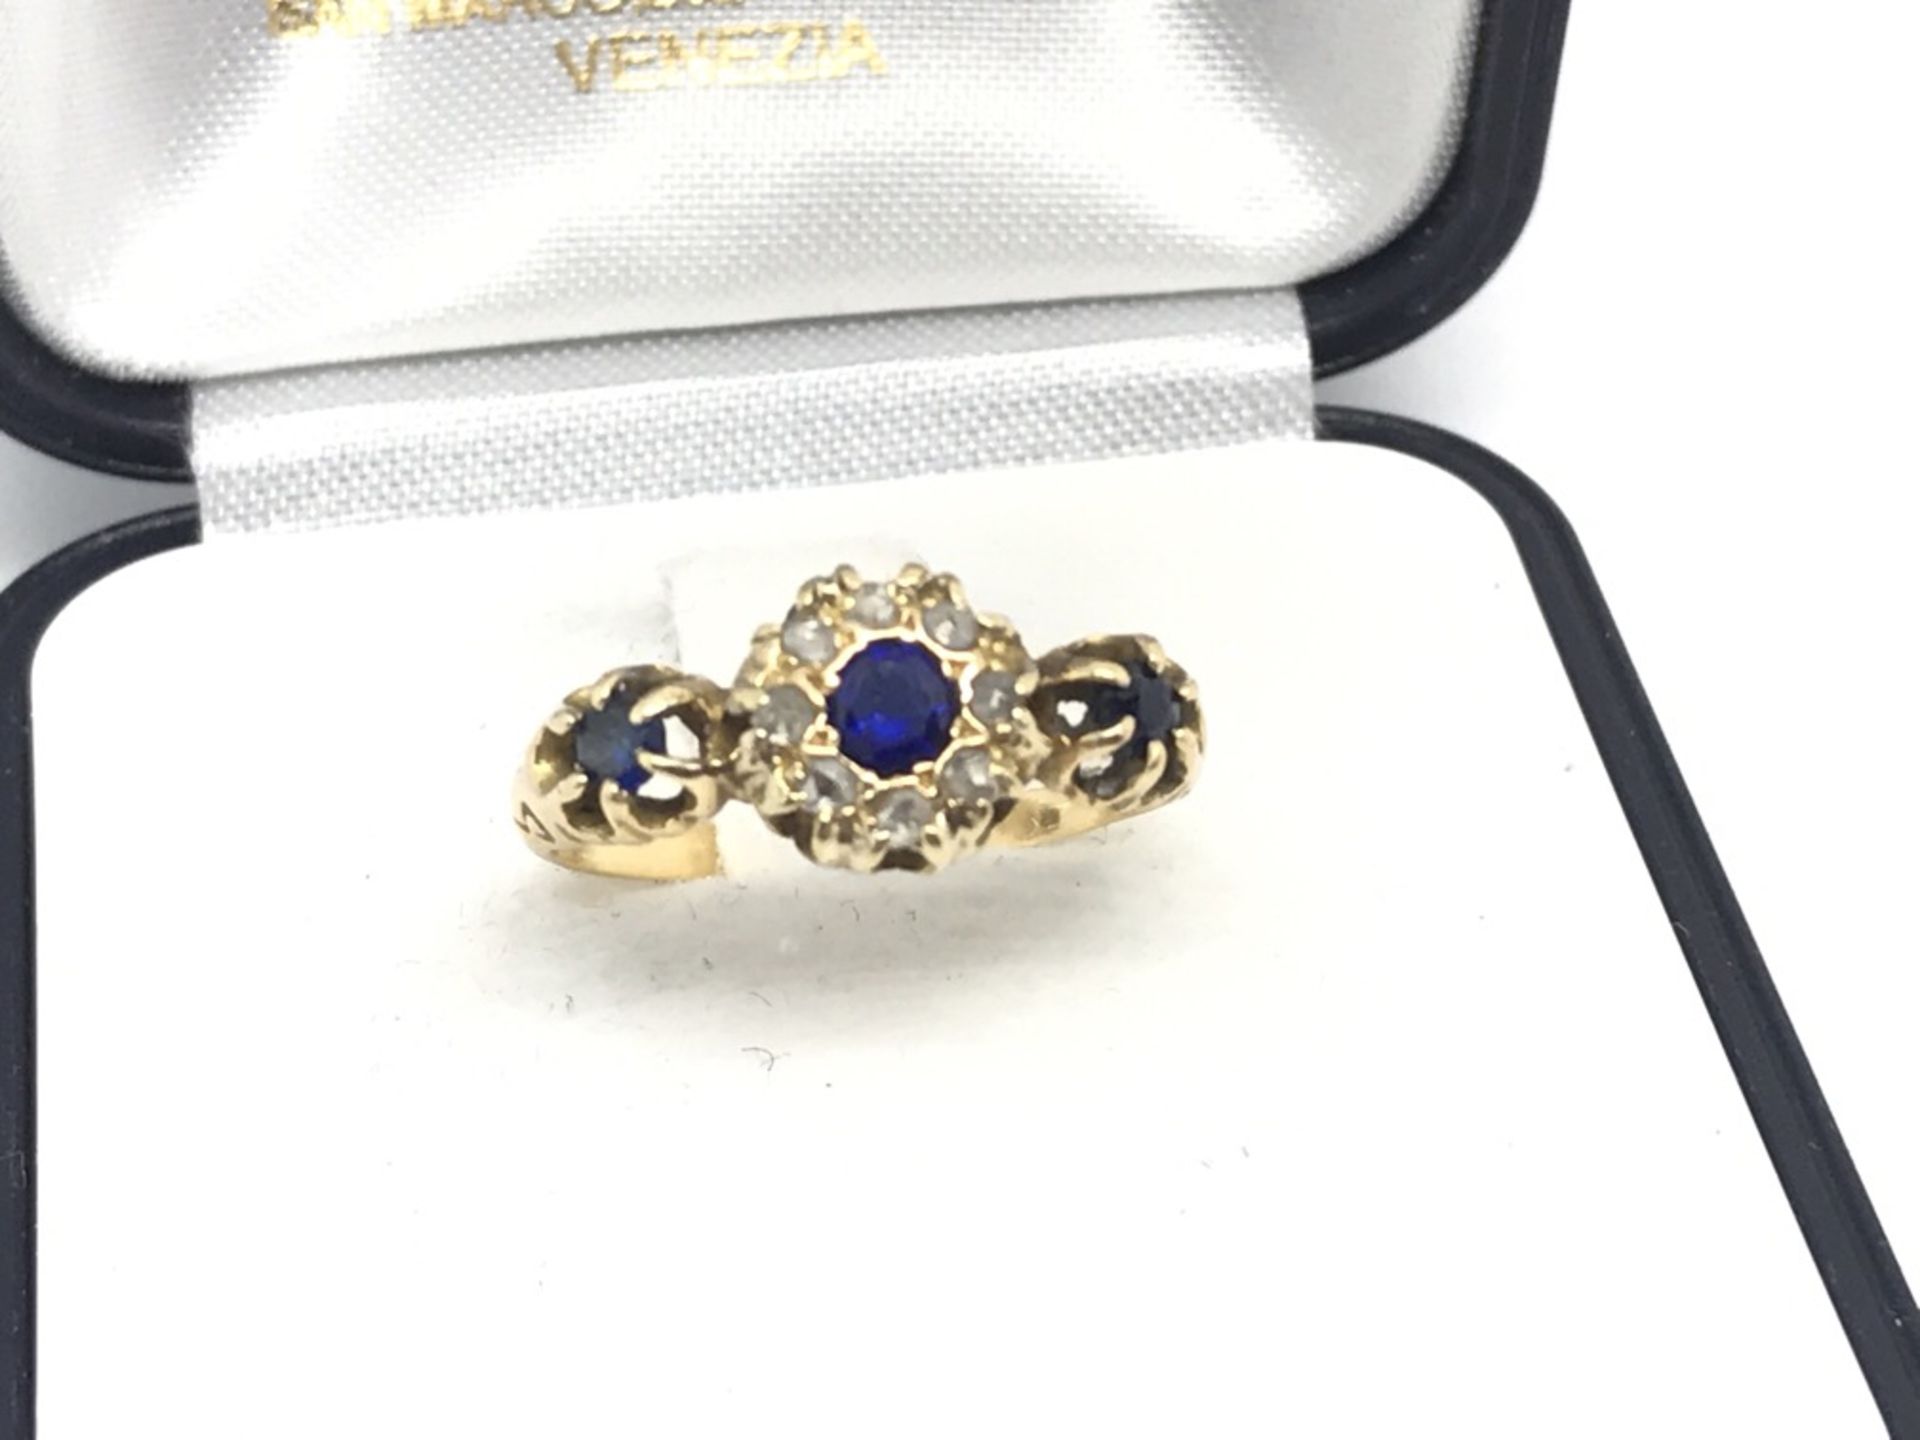 ANTIQUE RING SET WITH KASHMIR BLUE COLOURED SAPPHIRE & OLD CUT DIAMONDS SET IN YELLOW METAL - Image 2 of 2